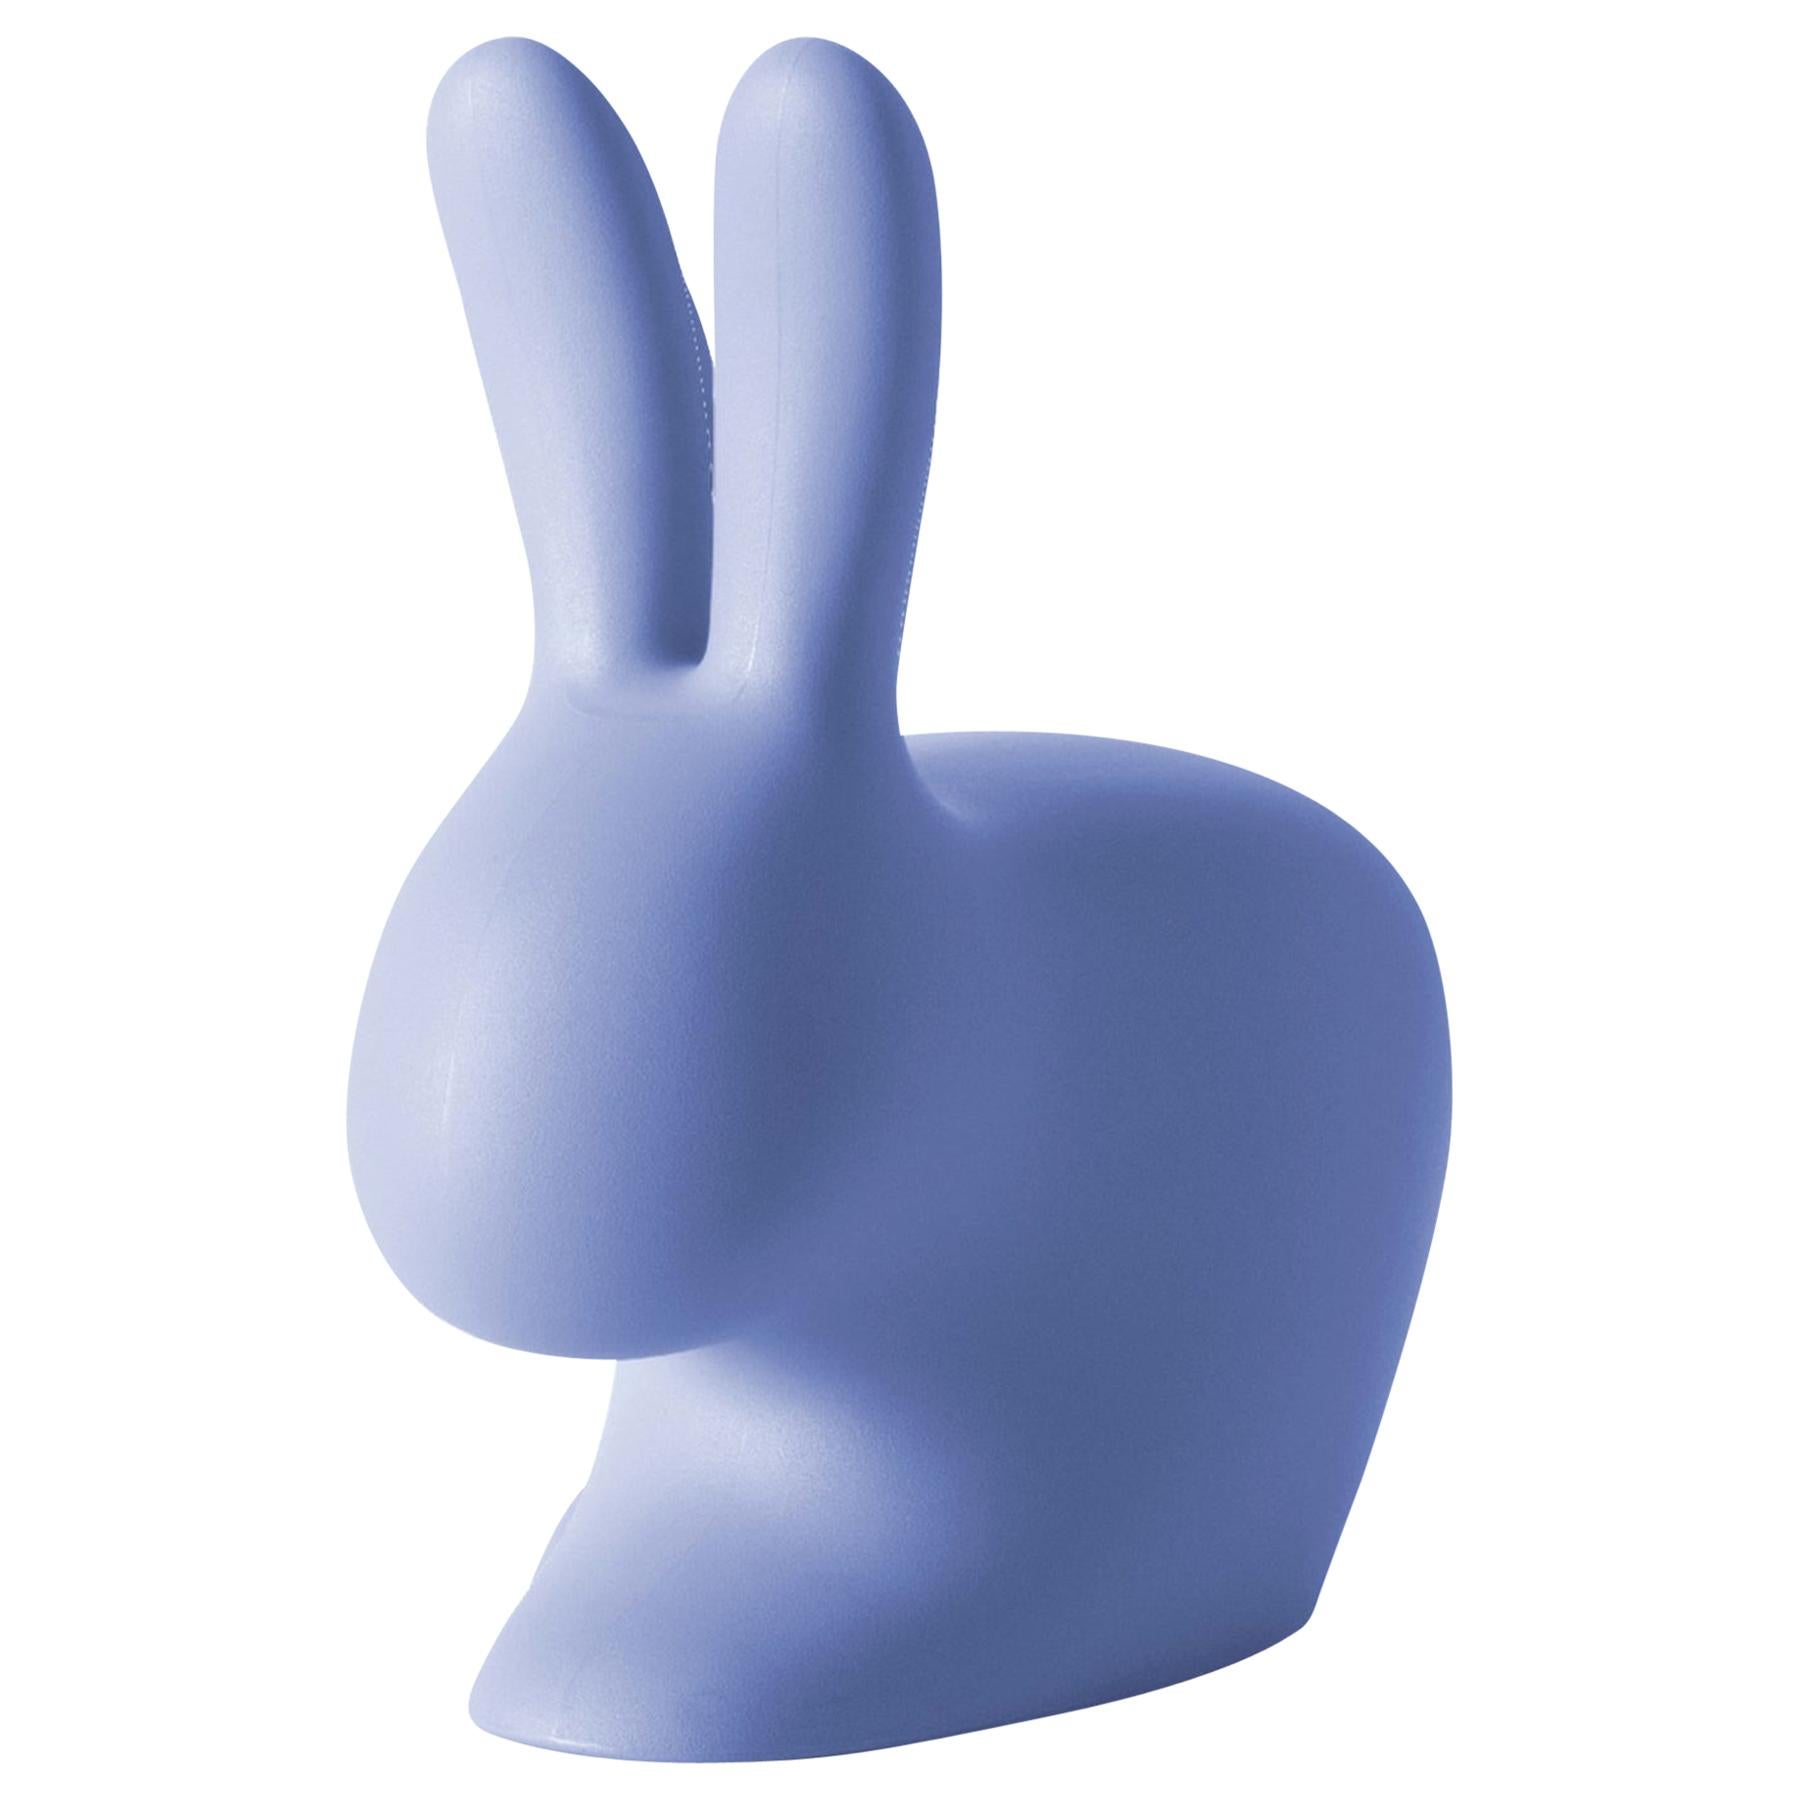 In Stock in Los Angeles, Light Blue Baby Rabbit Chair, by Stefano Giovannoni